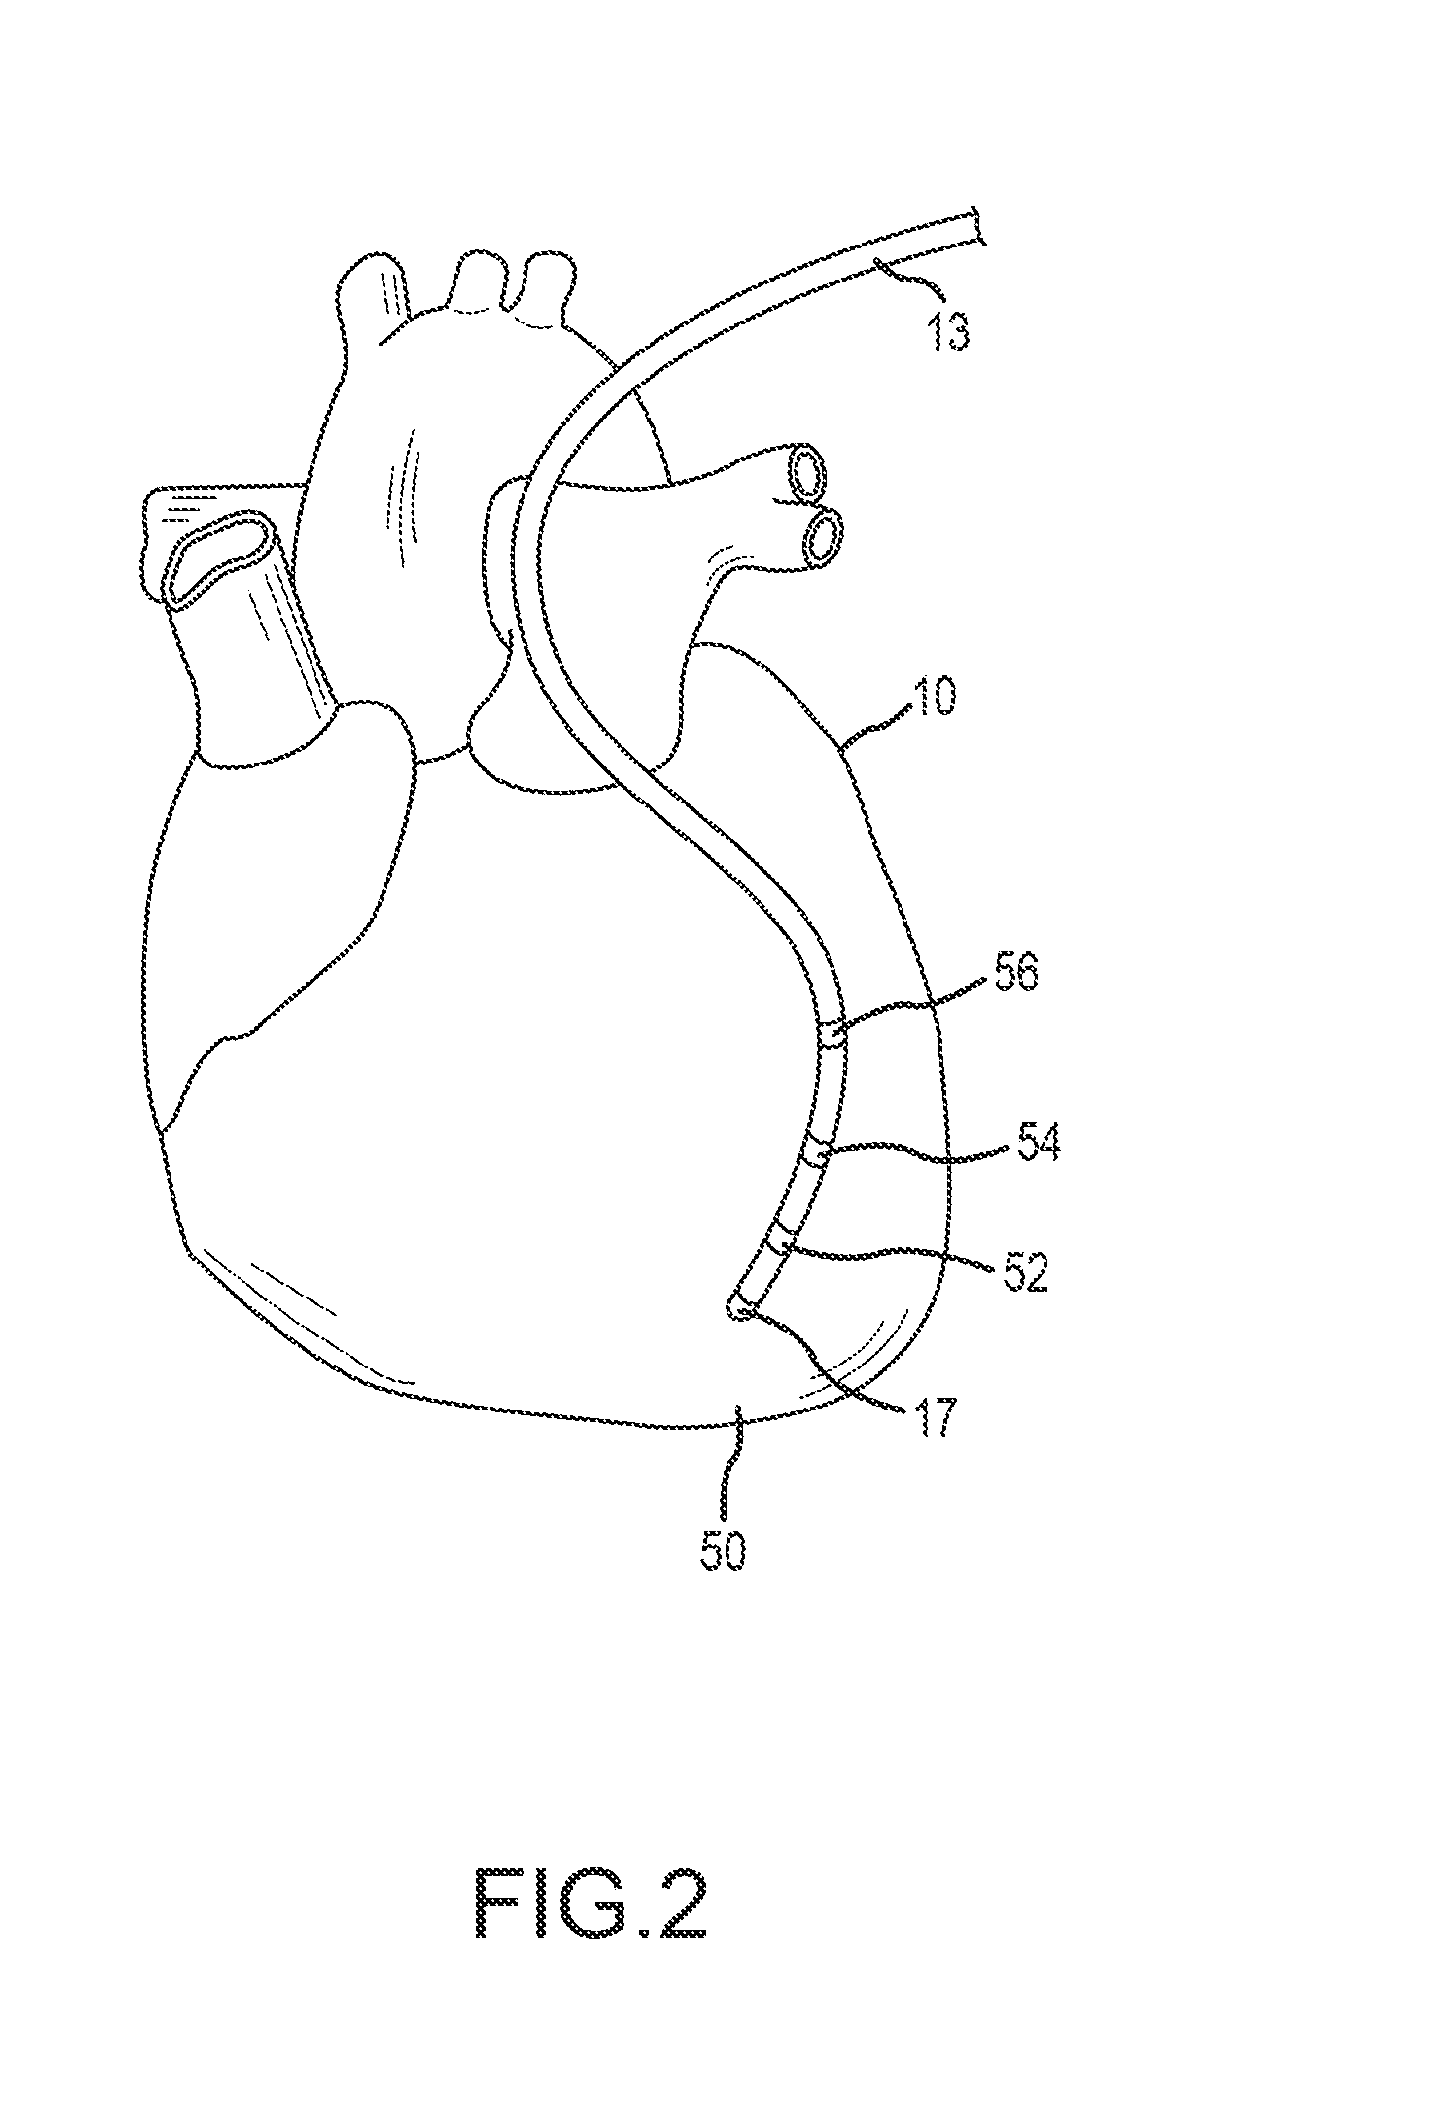 Non-contact mapping system and method